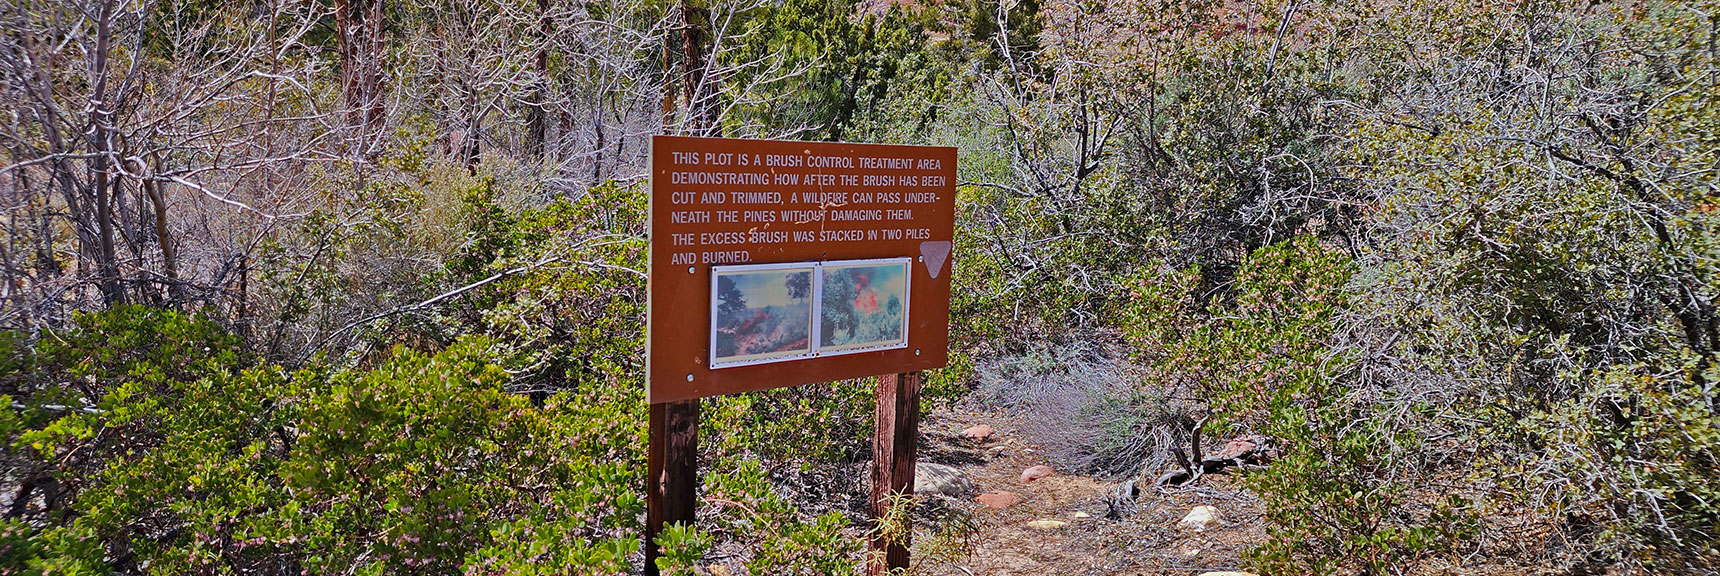 One of a Few Interpretive Signs on the Fire Ecology Trail | Fire Ecology Trail | Pine Creek Canyon | Red Rock Canyon NCA, Nevada | David Smith | LasVegasAreaTrails.com